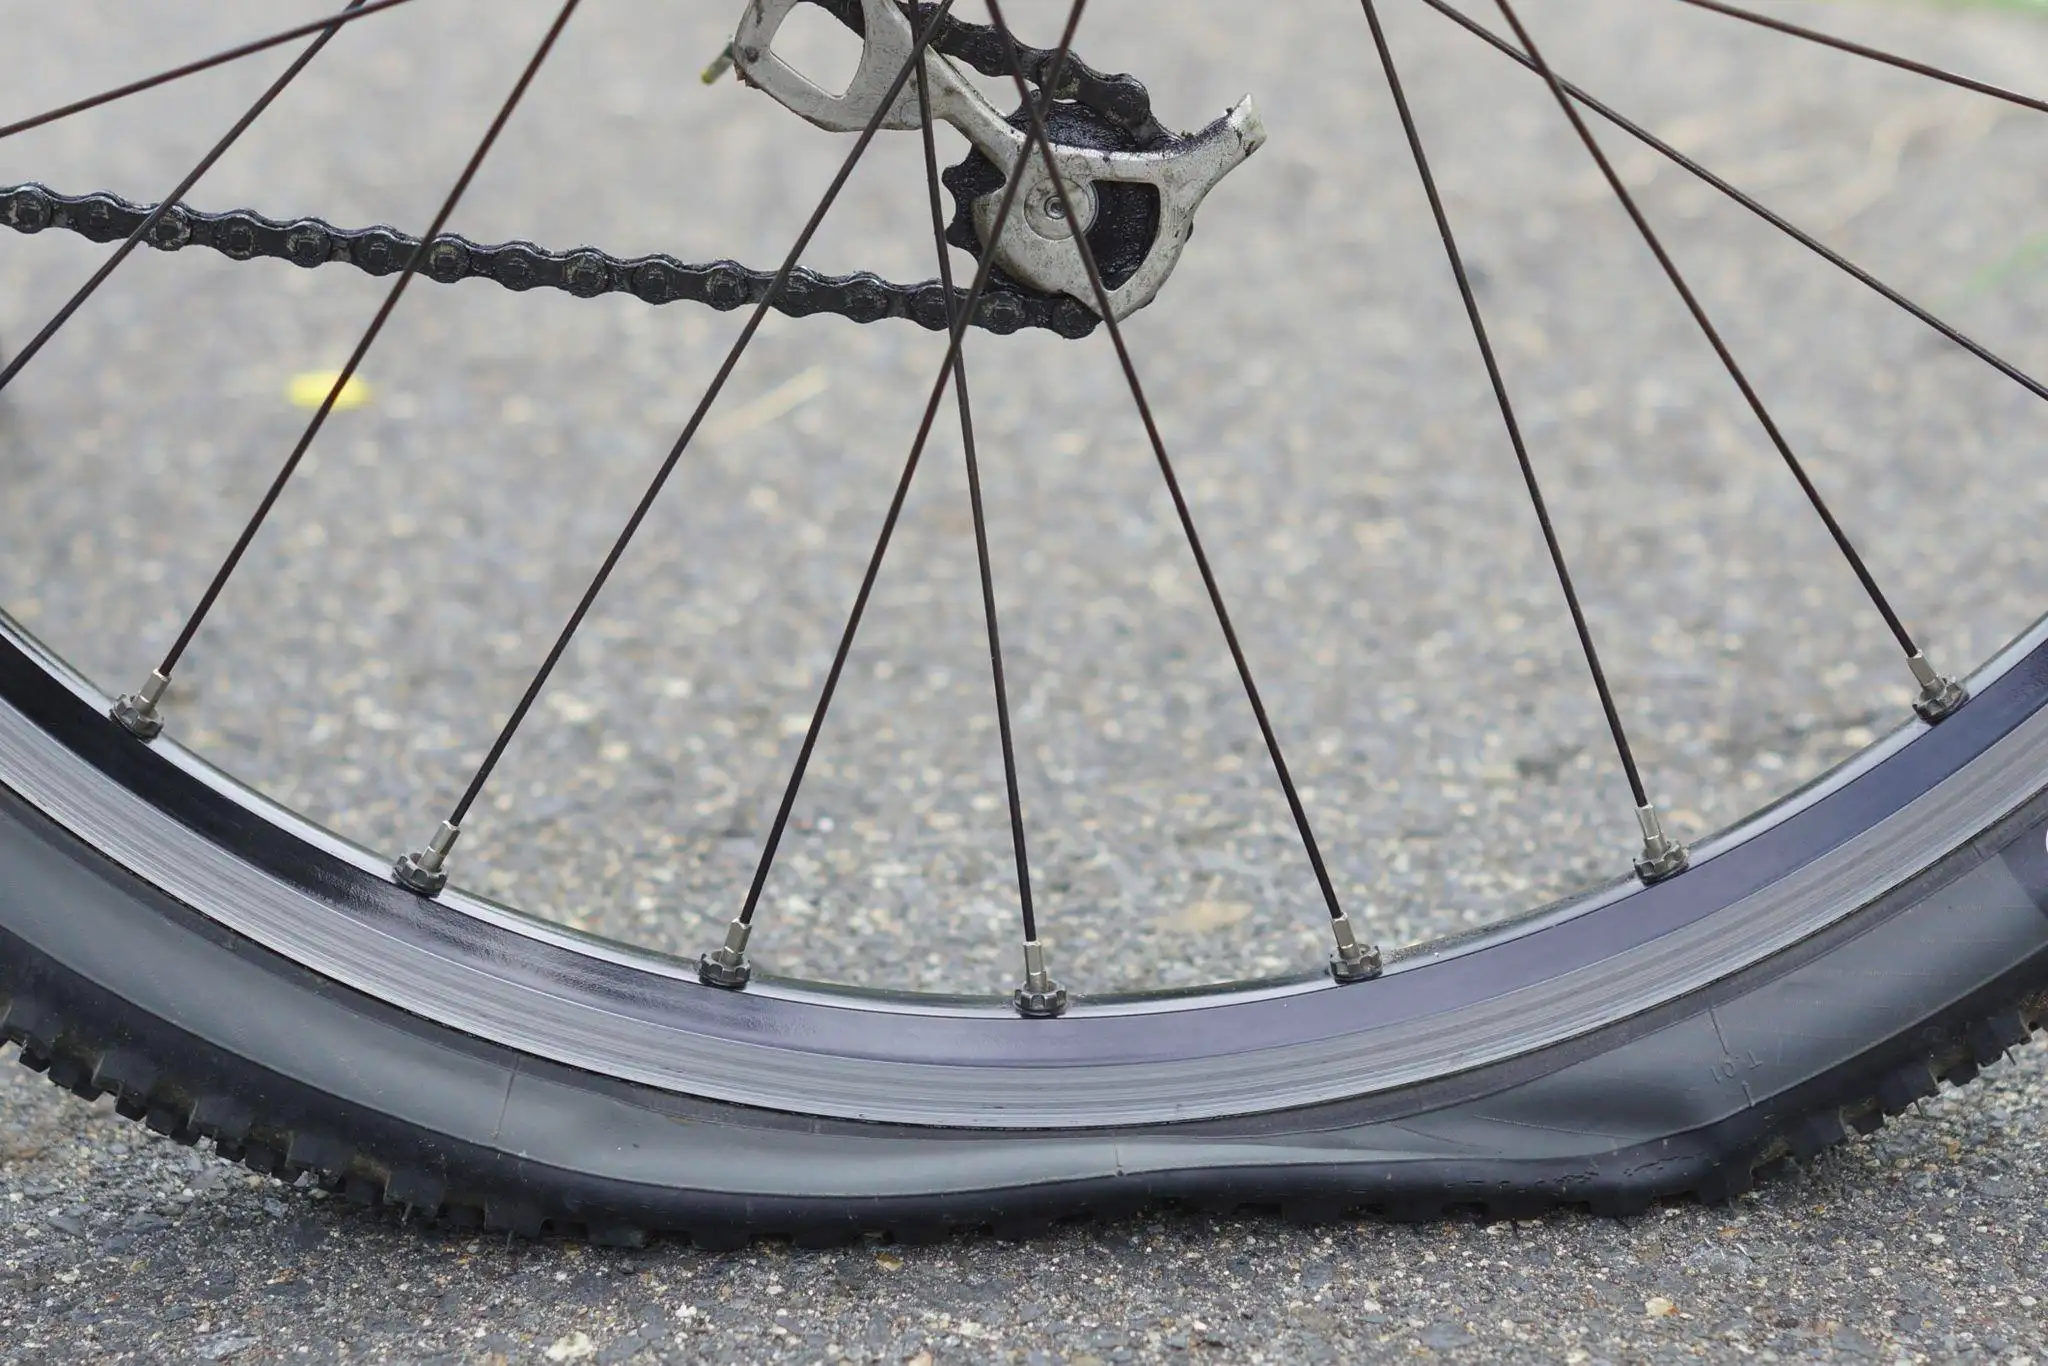 Why Does My Bike Tire Keep Going Flat?